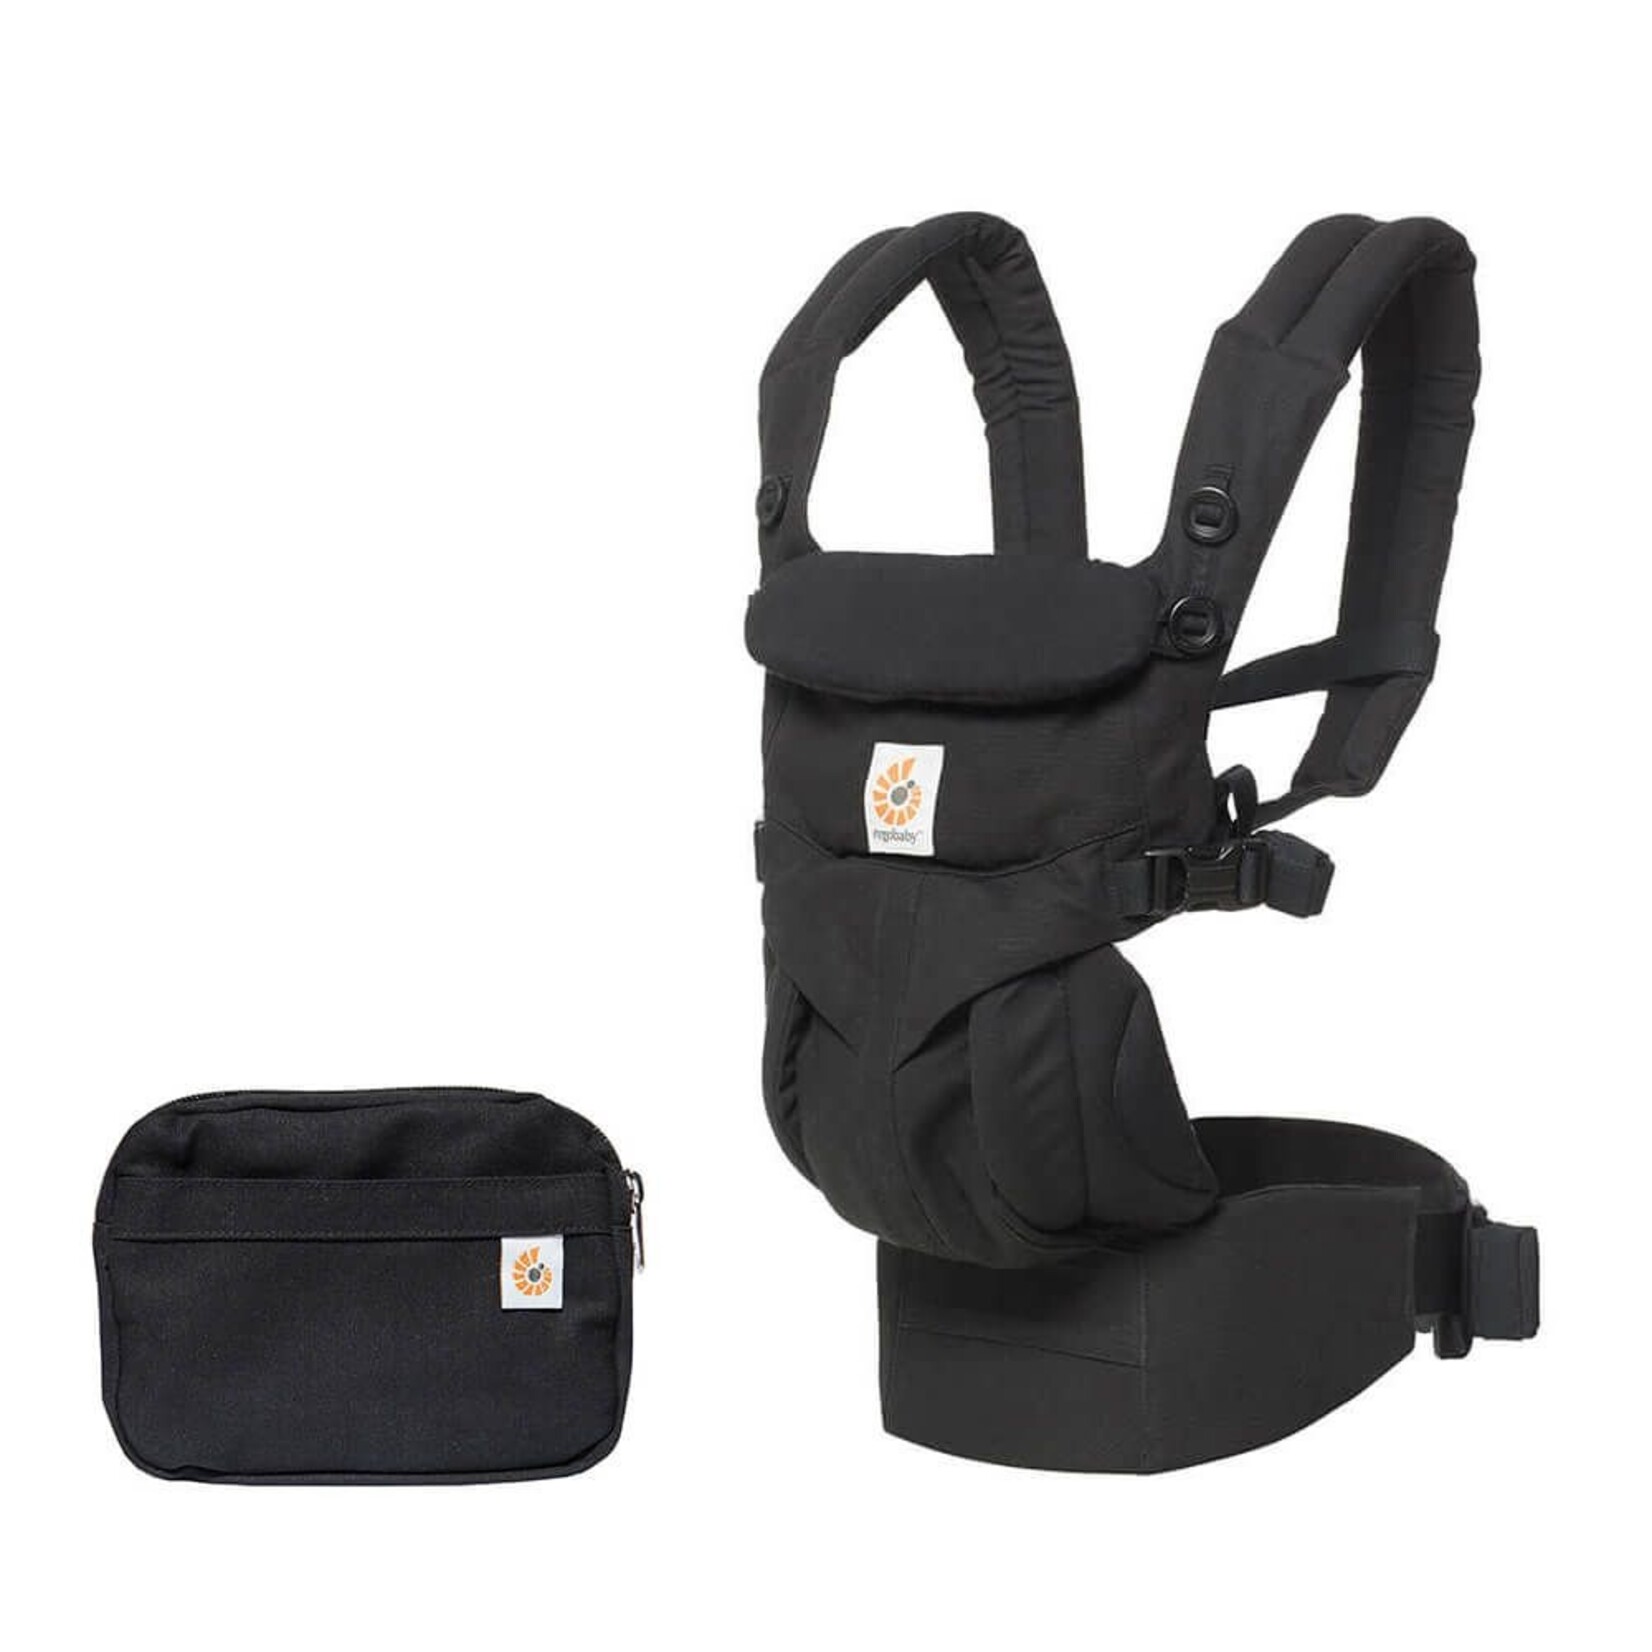 ERGOBABY OMNI 360 COTTON CARRIERS - Ready Set Baby